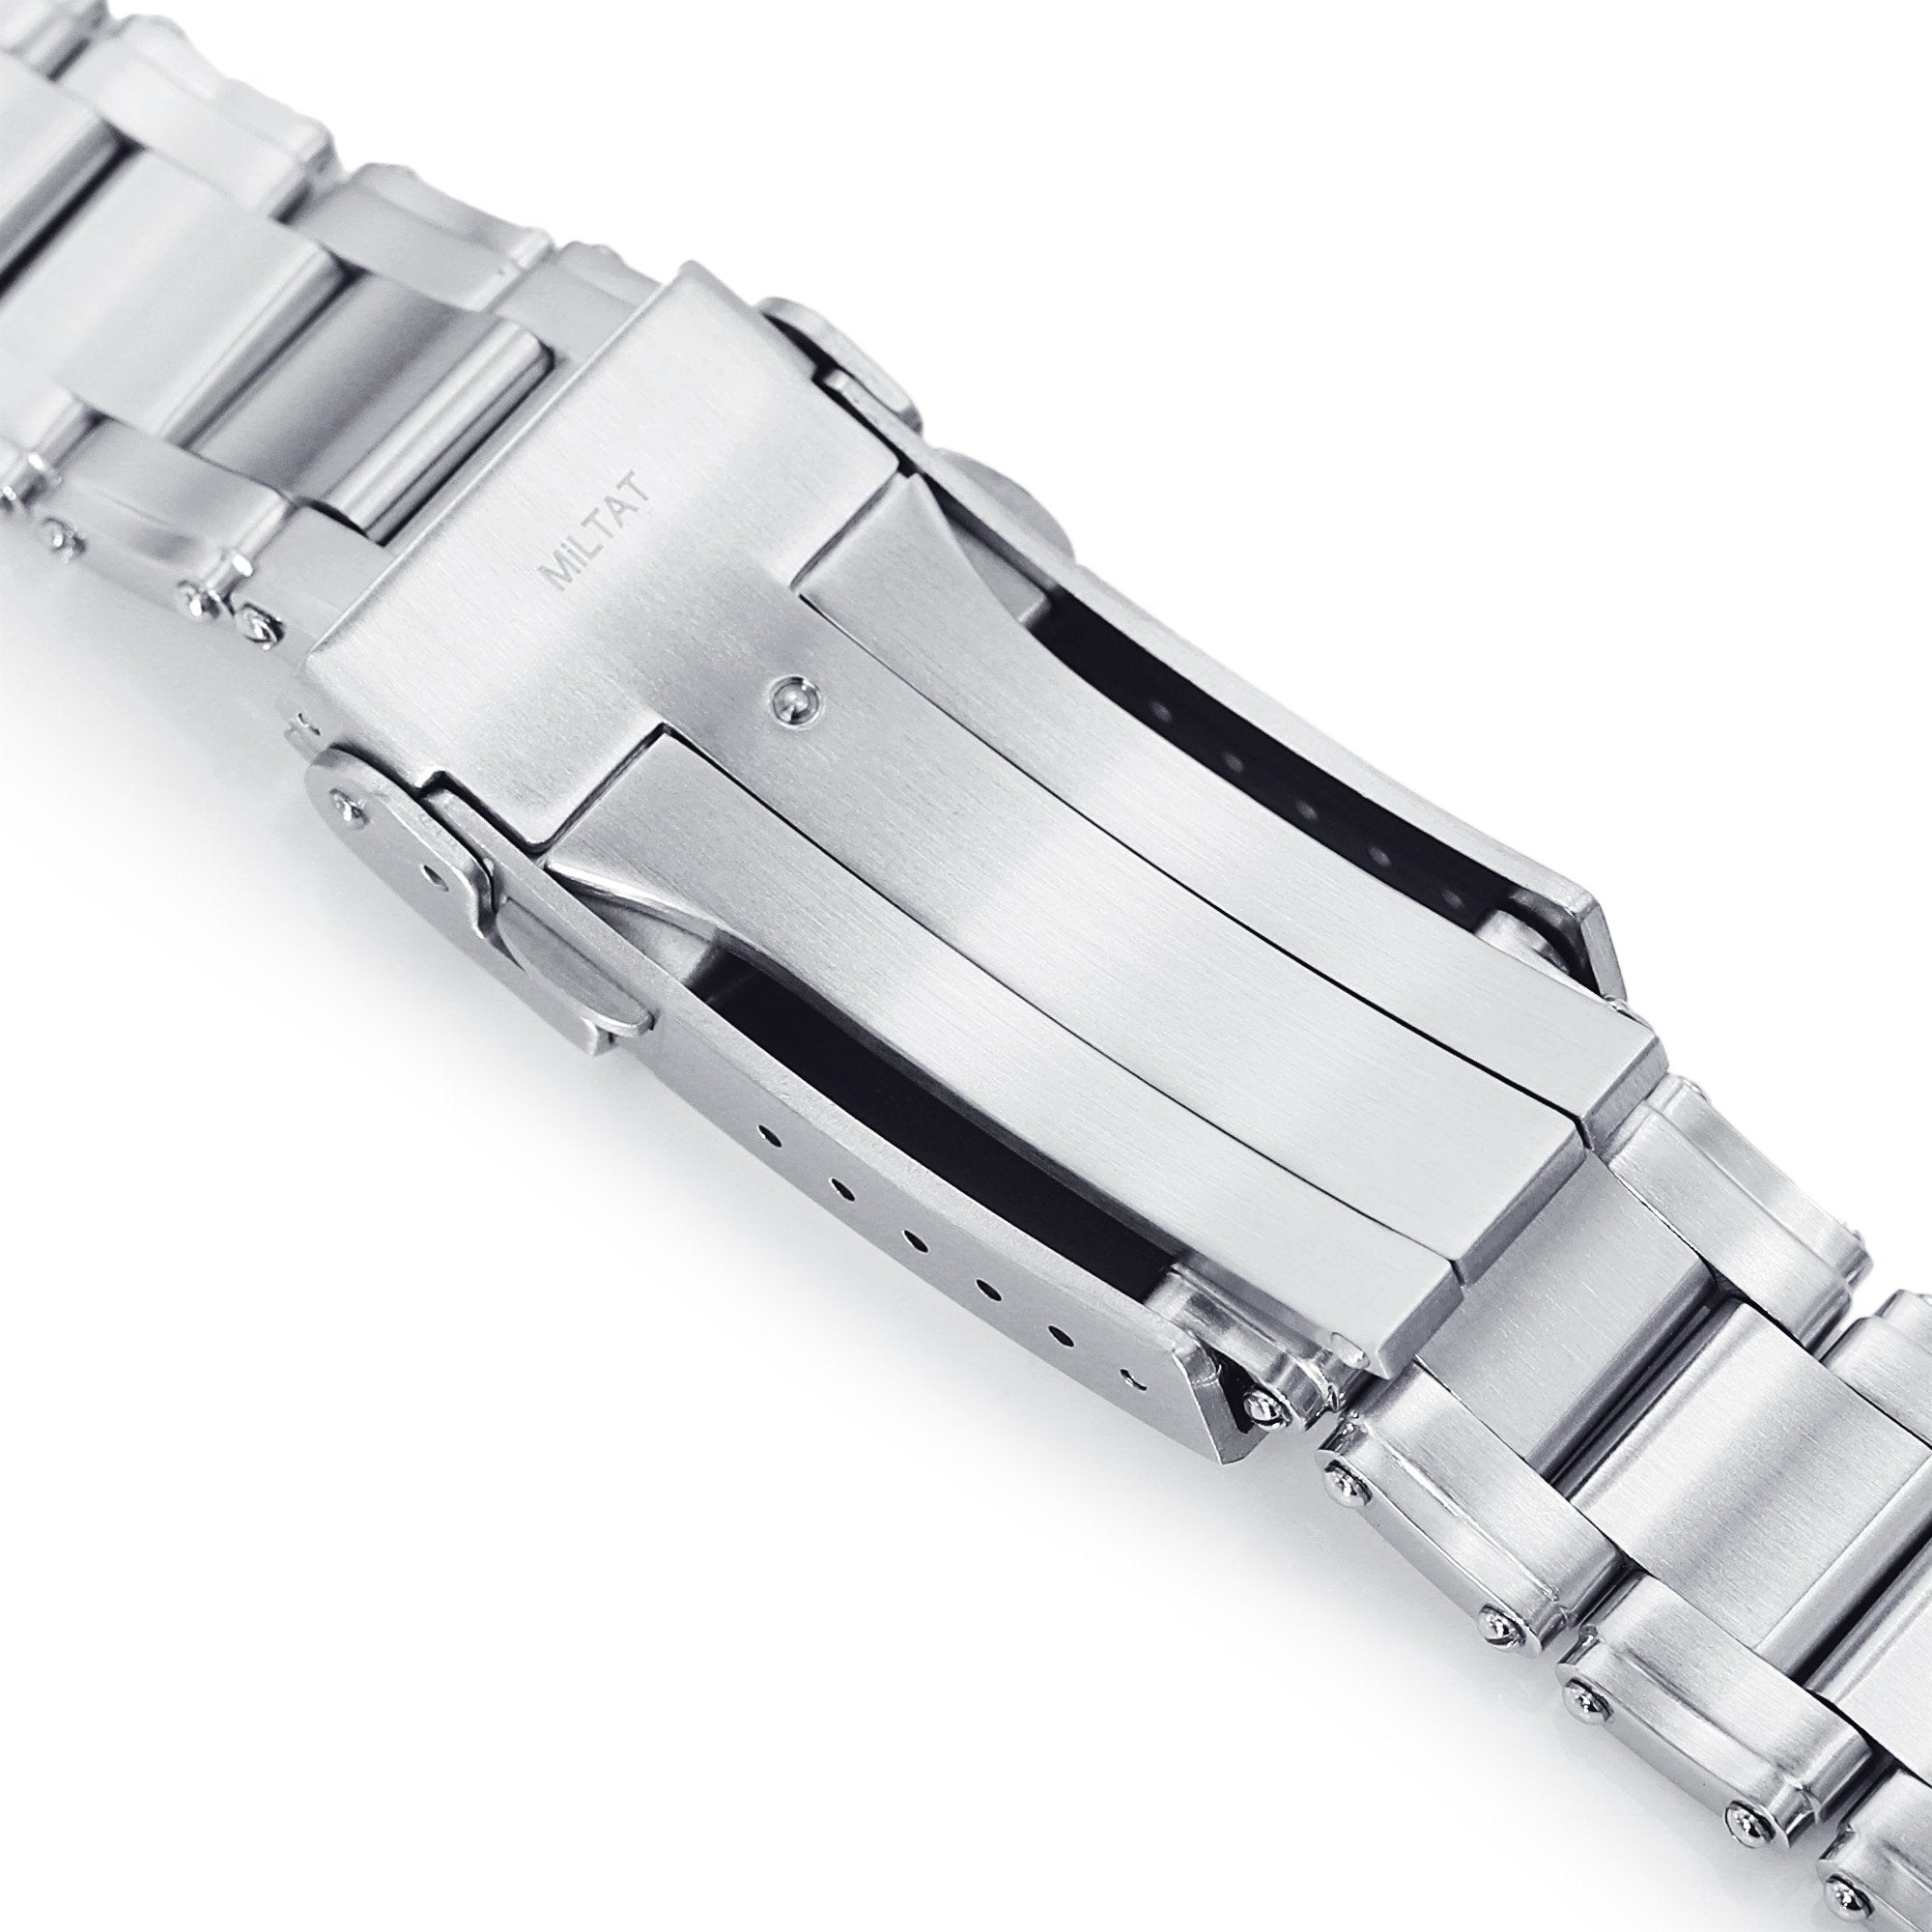 22mm Metabind 316L Stainless Steel Watch Bracelet for TUD BB 79230 Brushed and Polished V-Clasp Strapcode Watch Bands